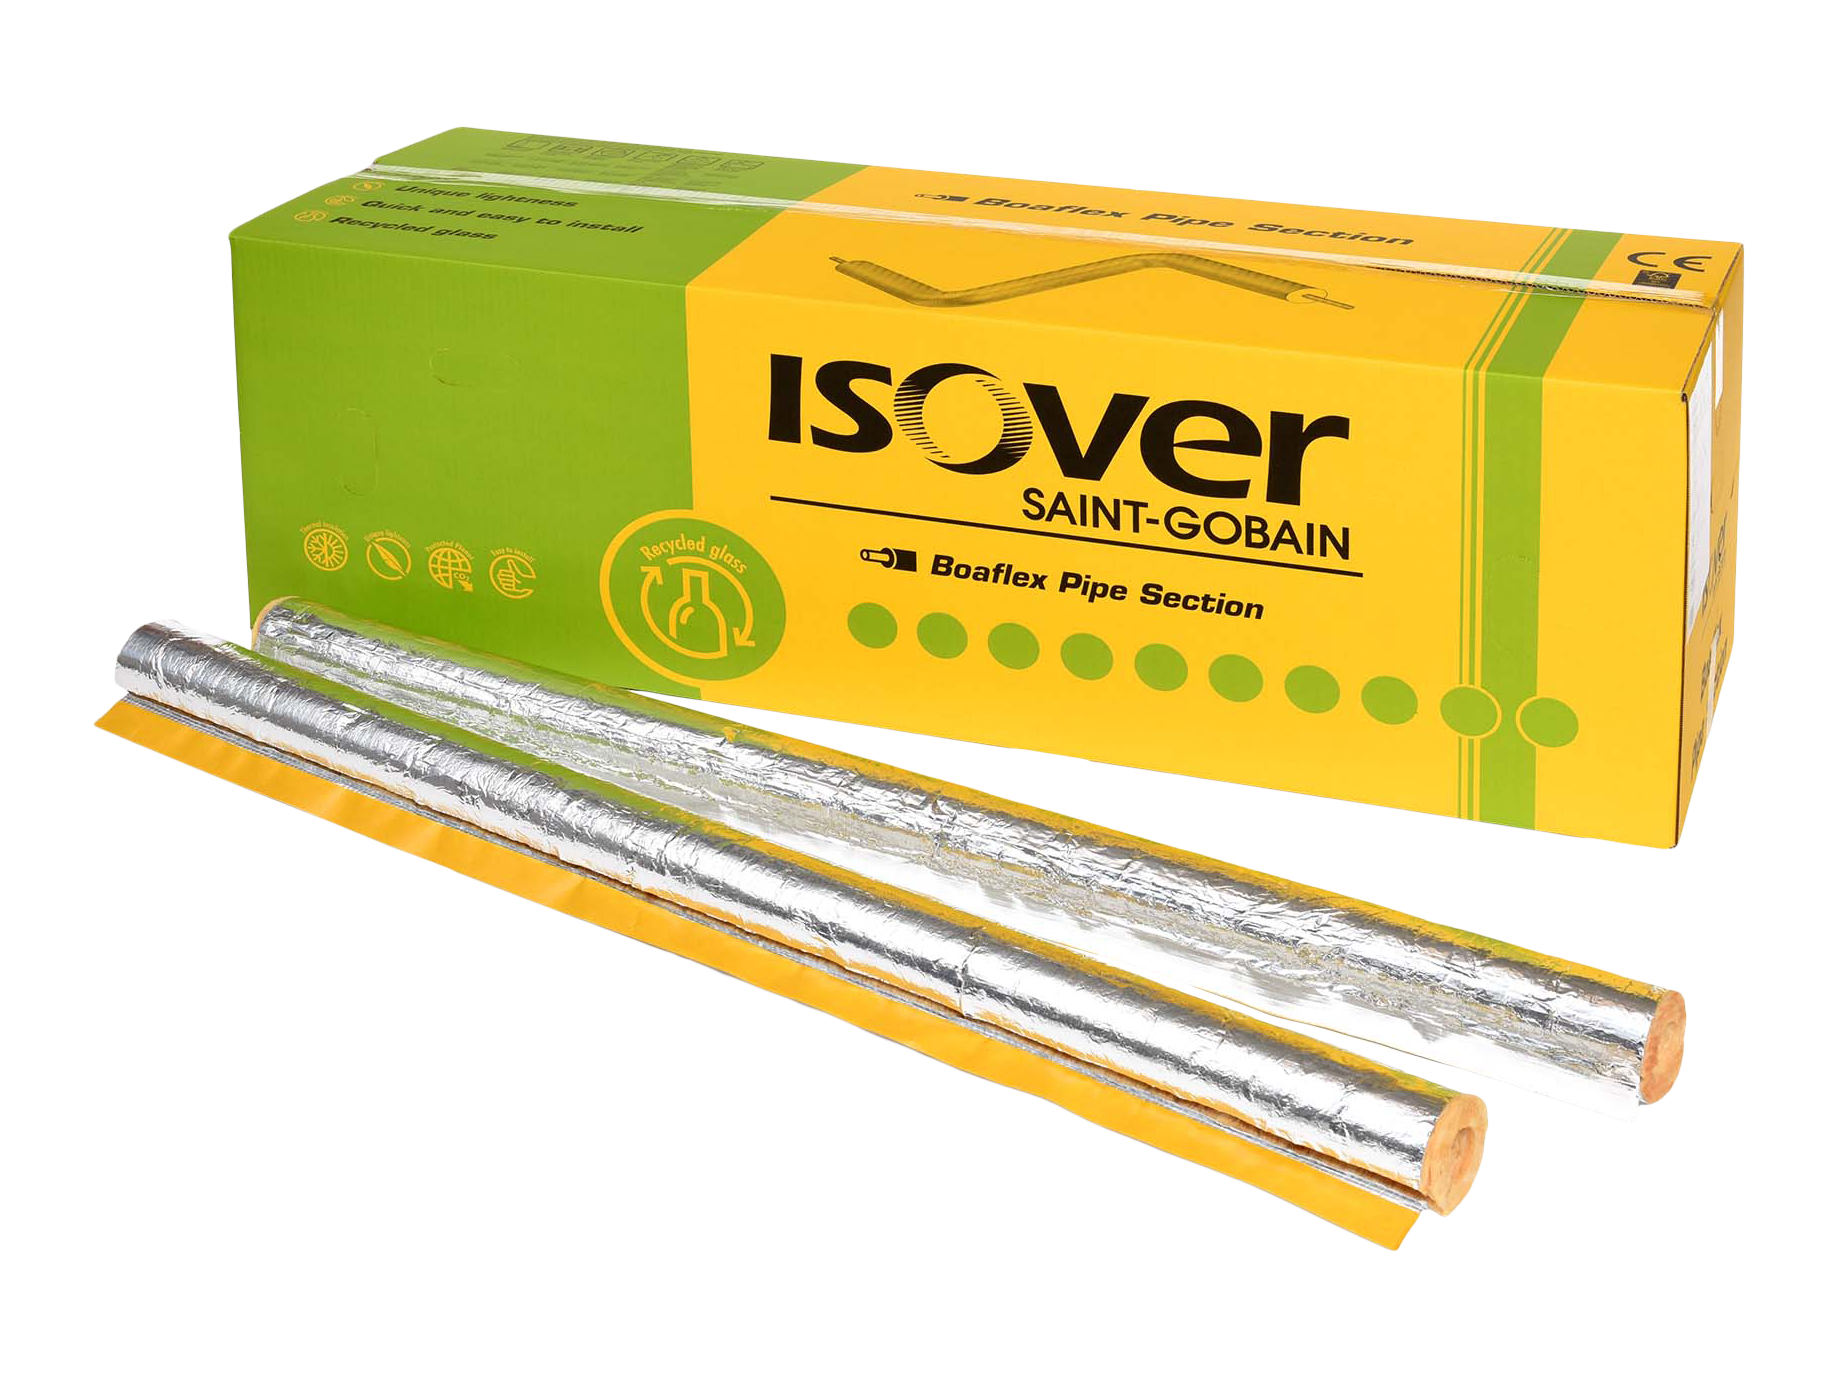 ISOVER Boaflex Pipe Section 35/50